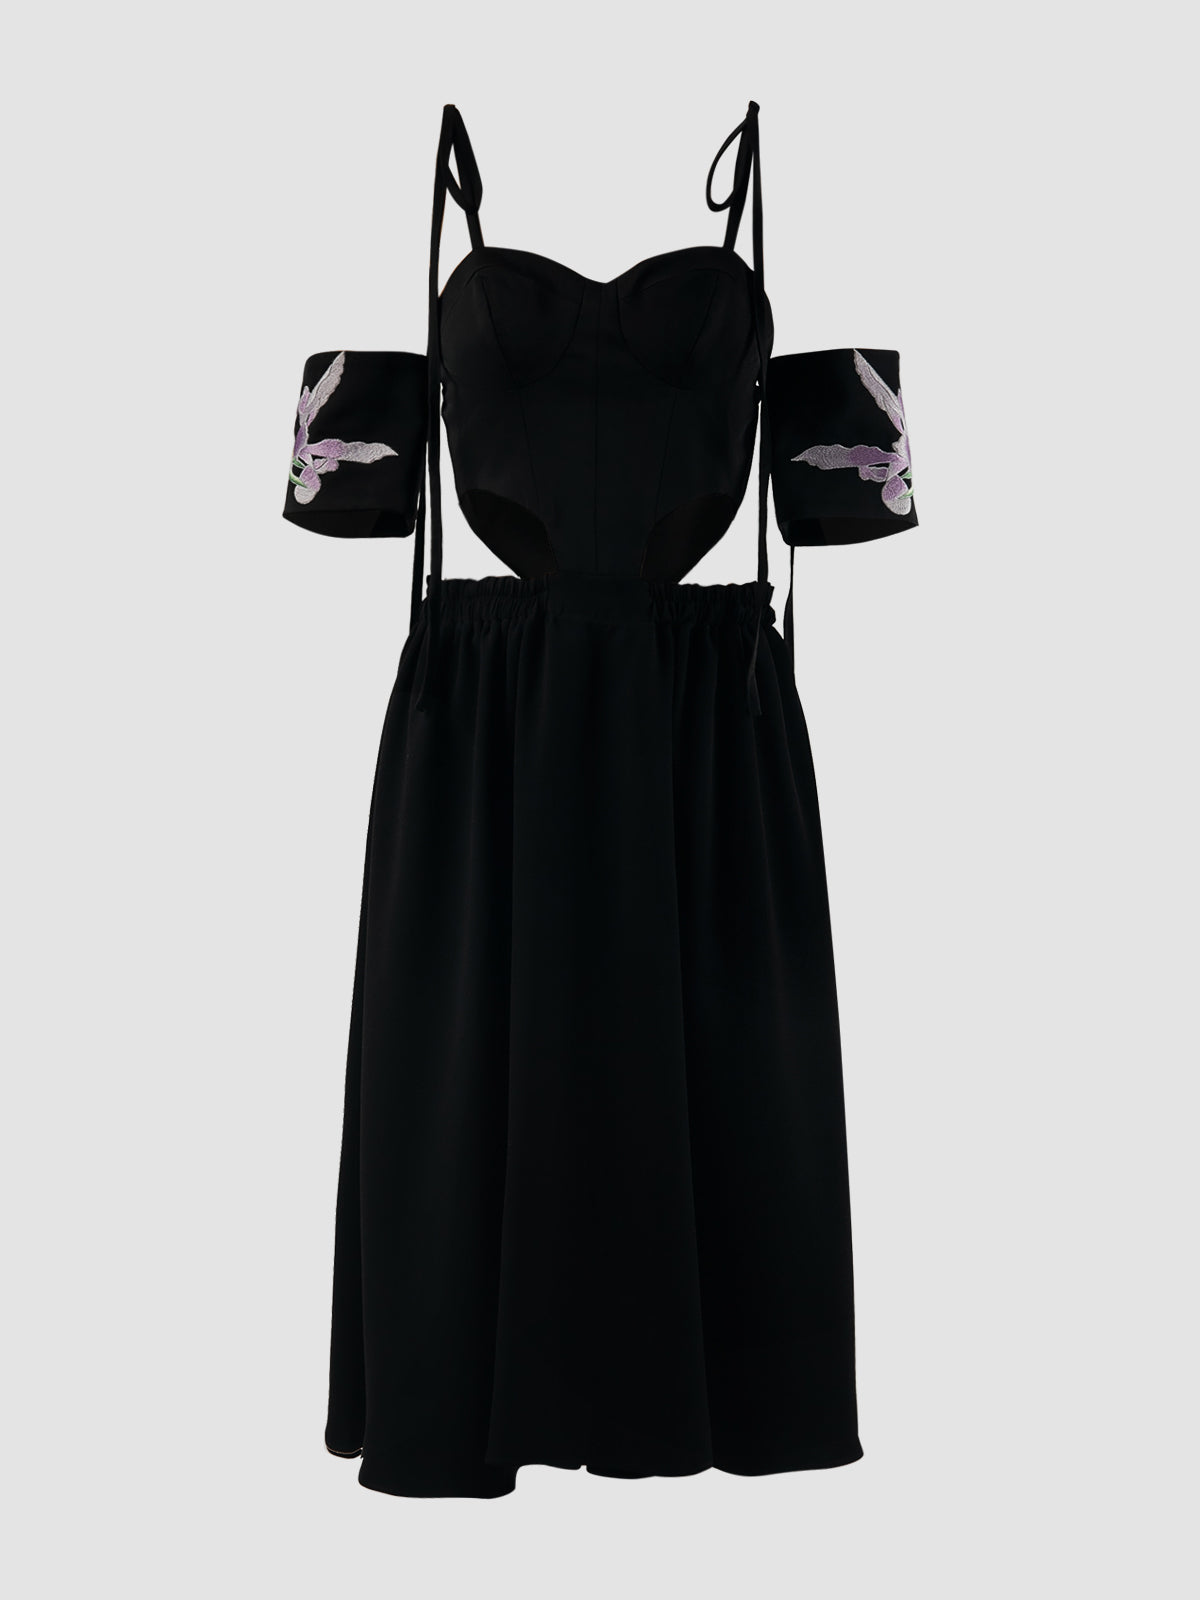 Black corset dress with cutout details and embroidered sleeves